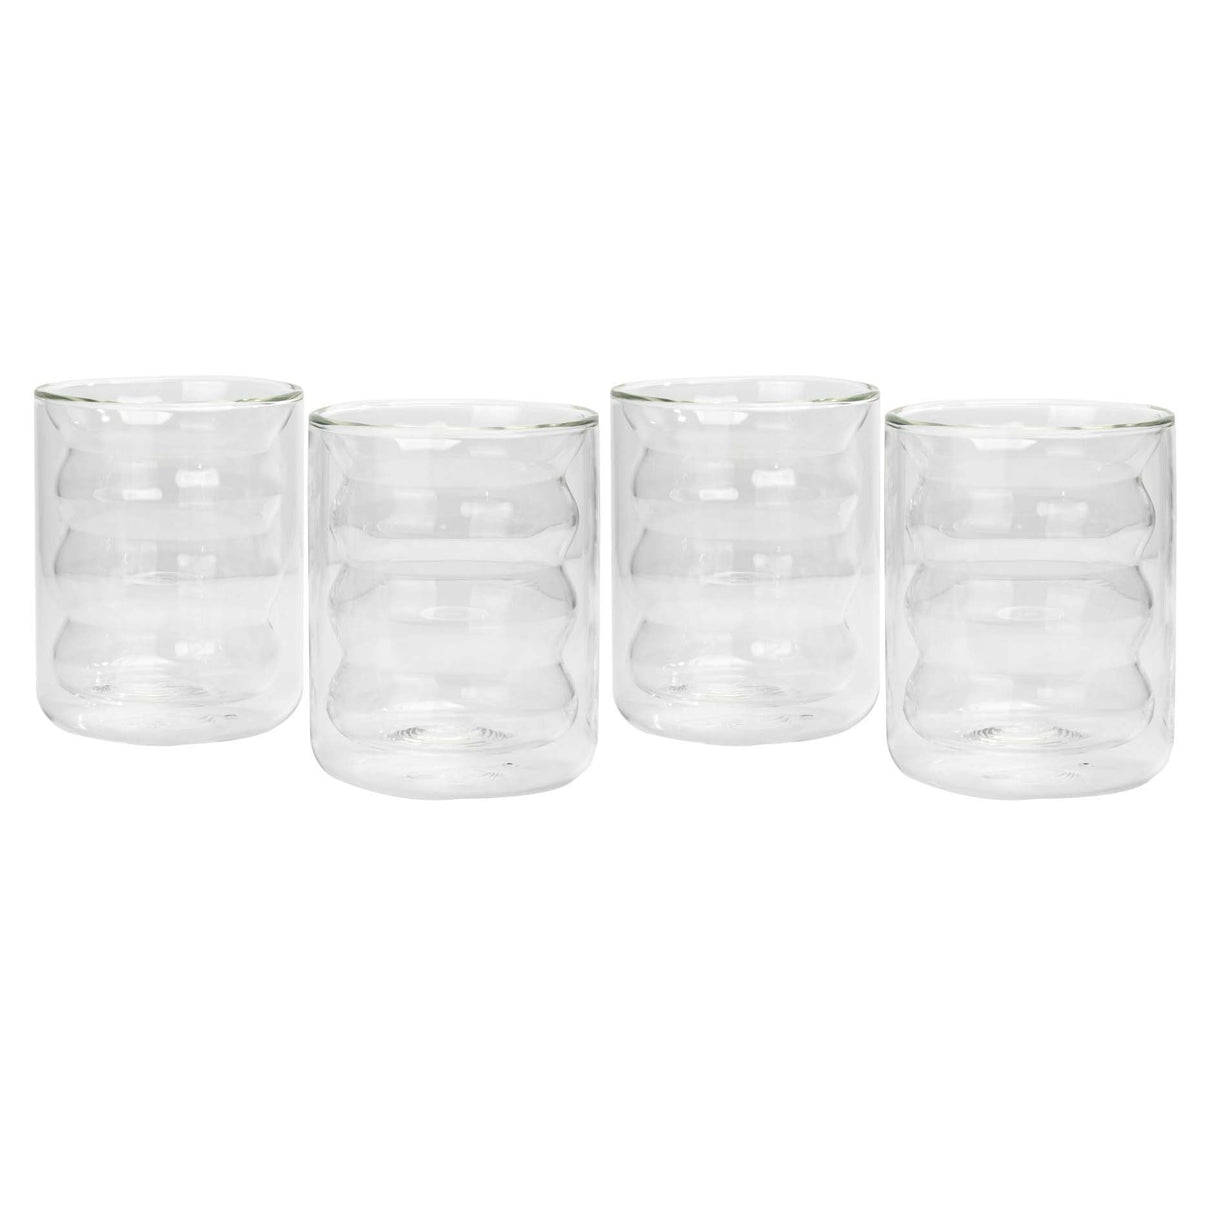 Waves Water Glass - Set of 4 Glassware